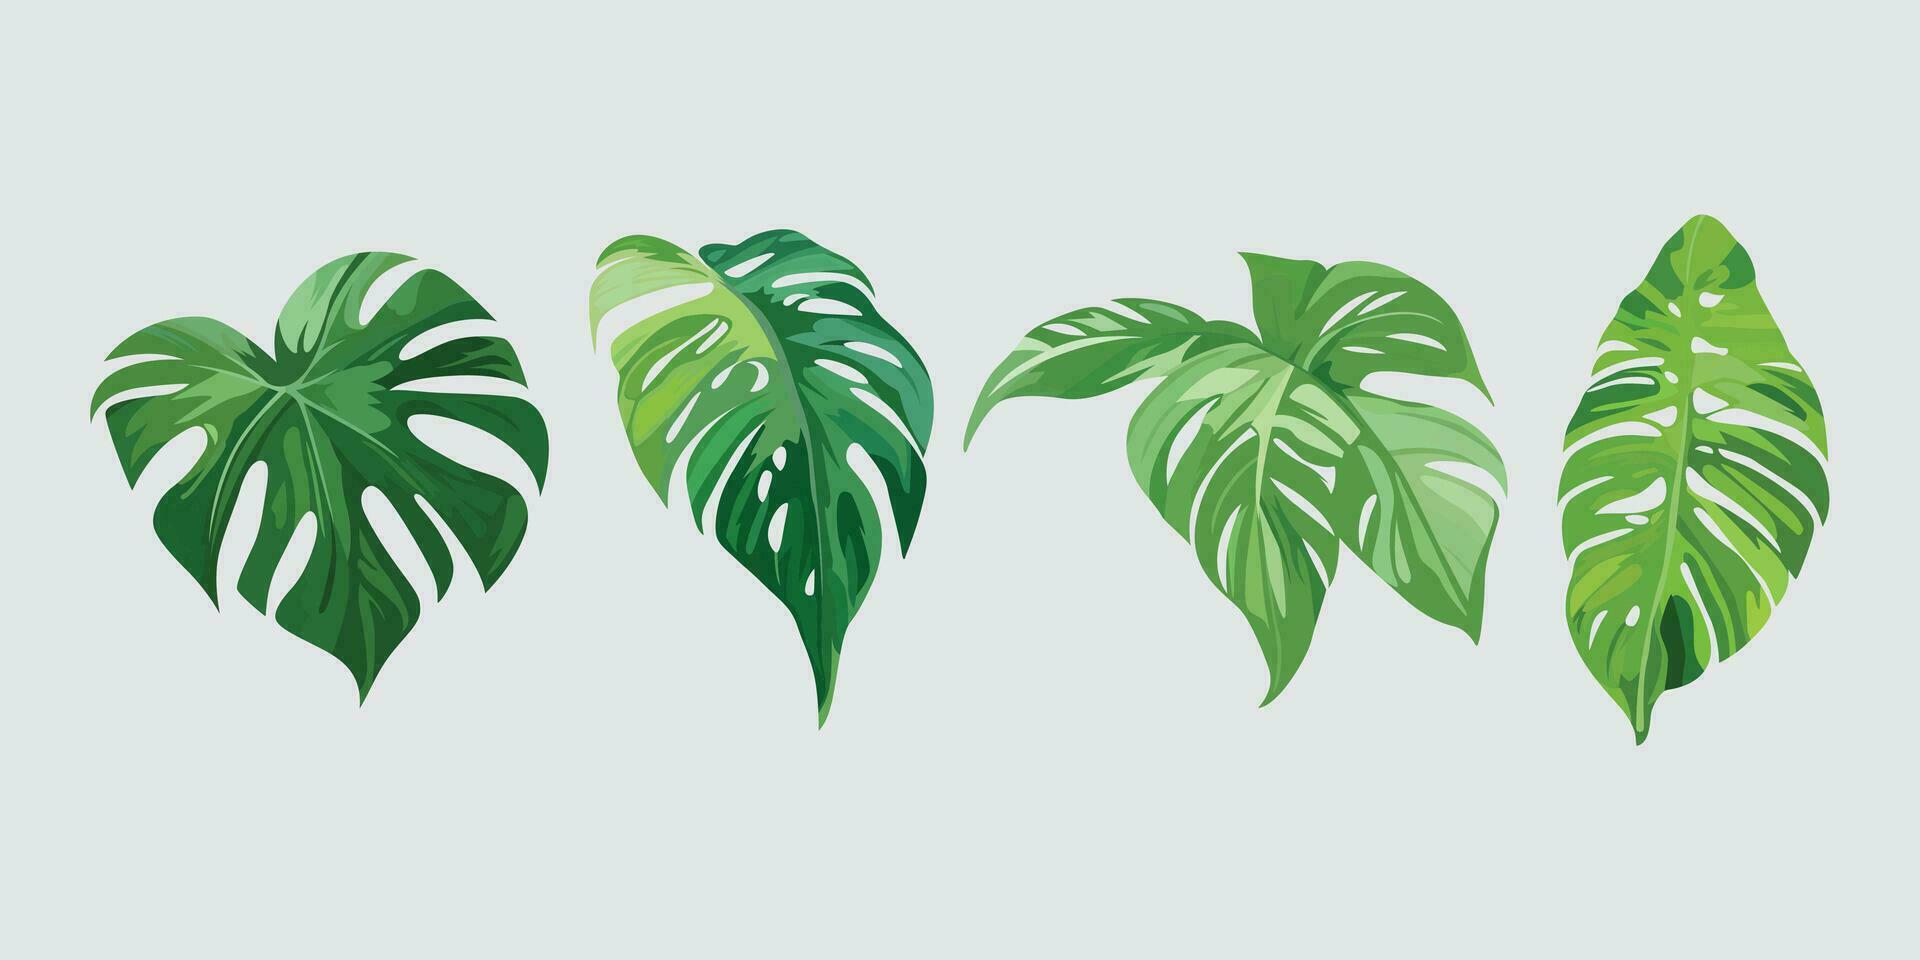 House plants in pots, icon set of tree, garden plant vector